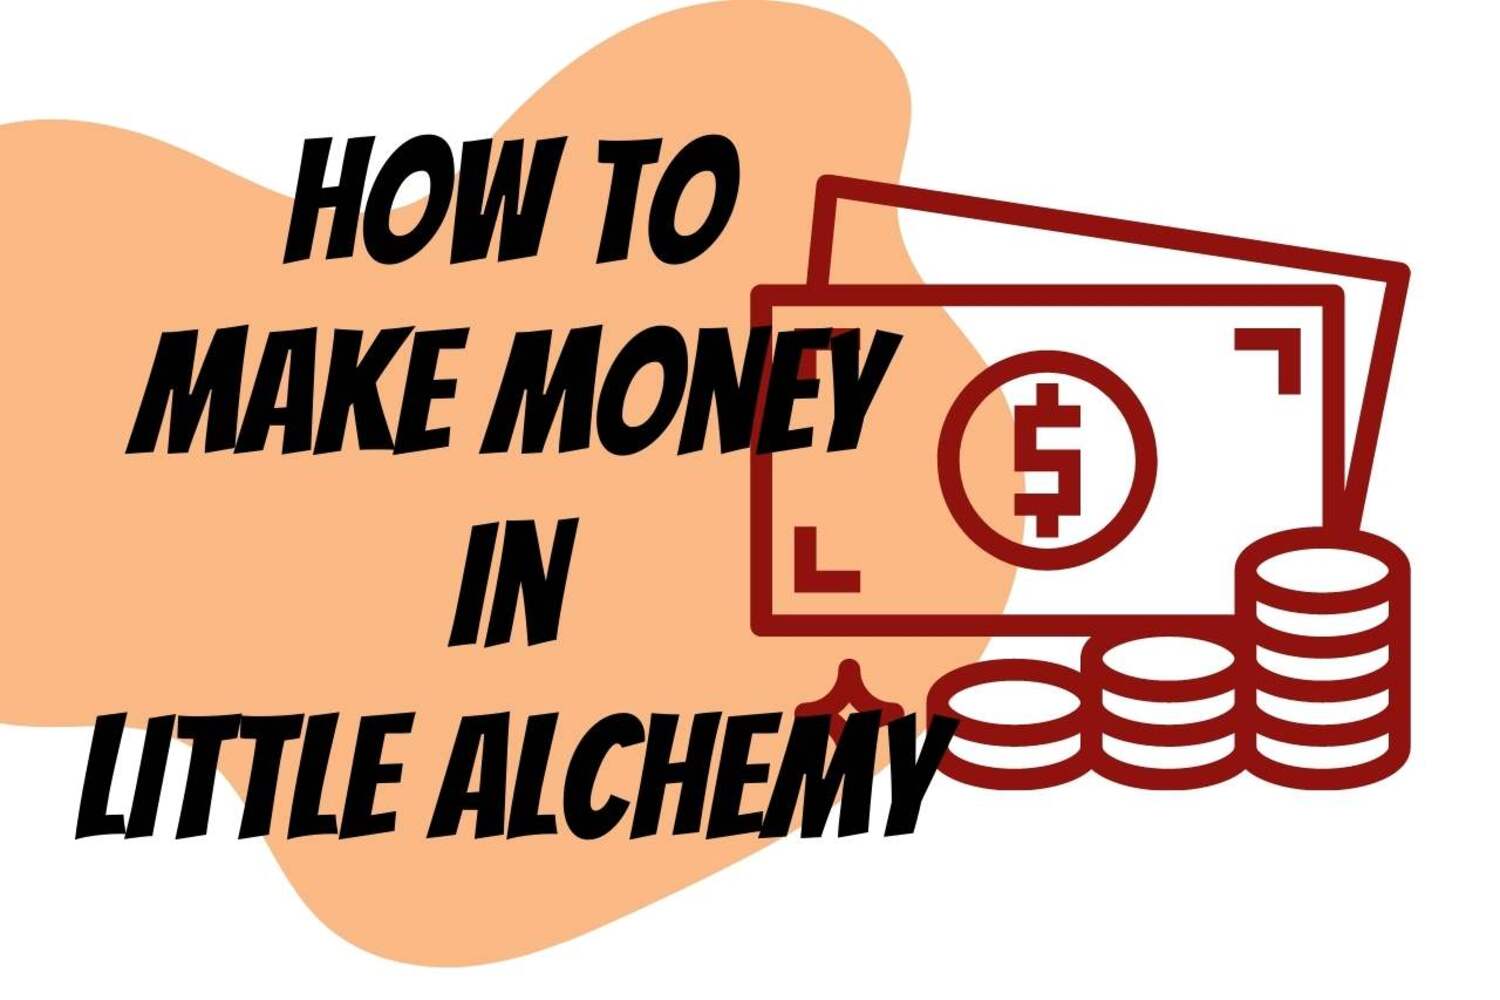 How To Make Money In Little Alchemy